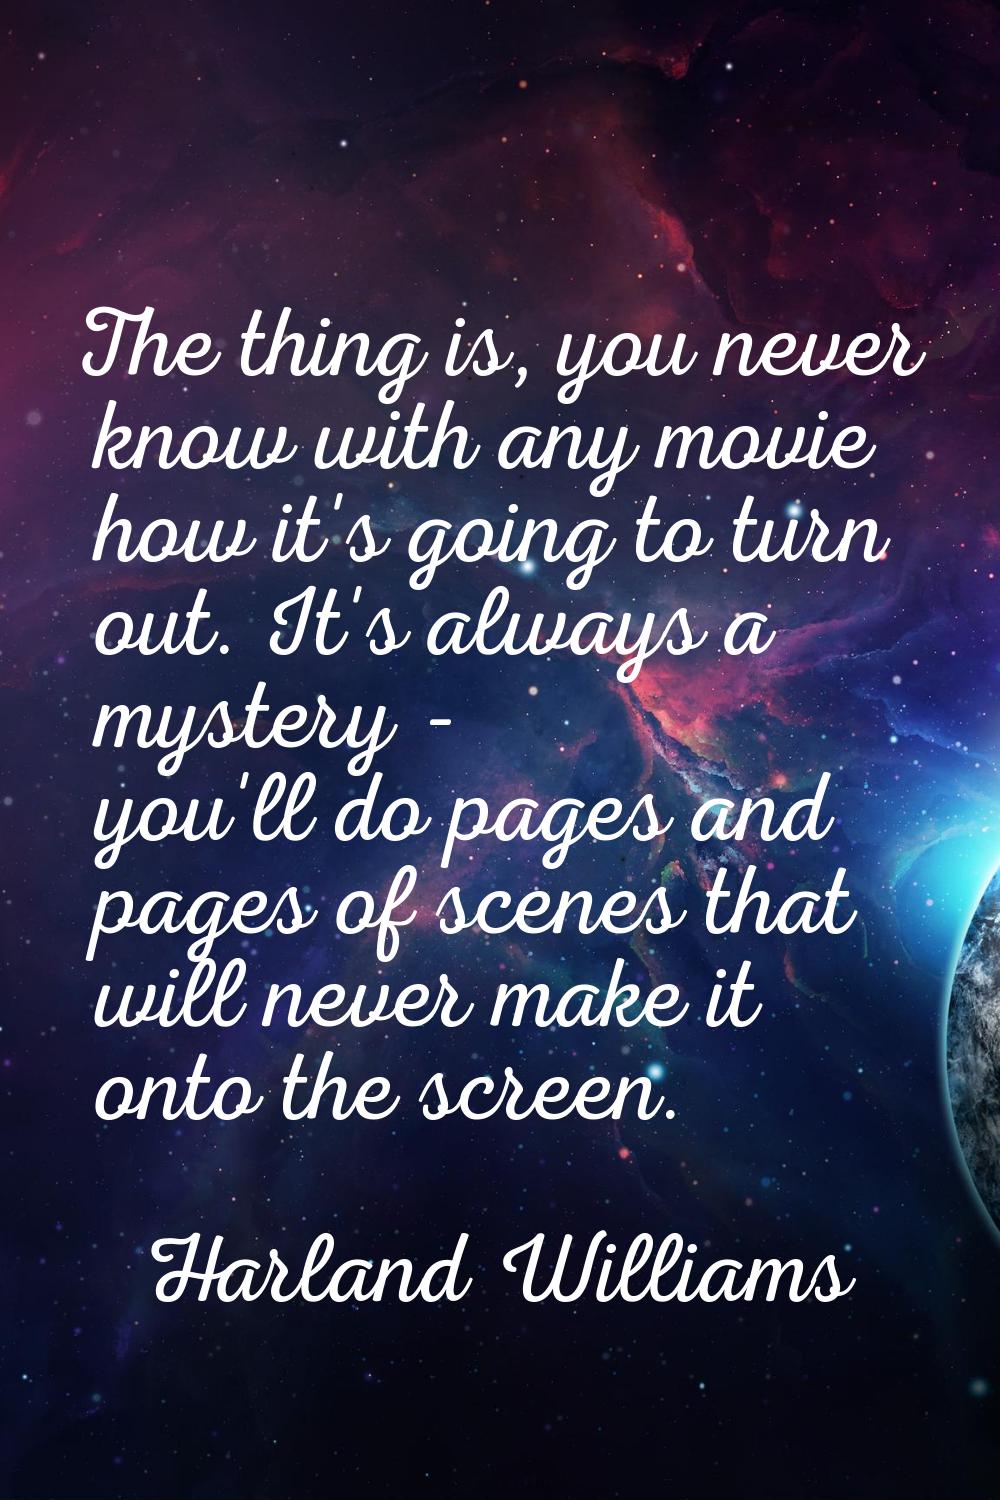 The thing is, you never know with any movie how it's going to turn out. It's always a mystery - you